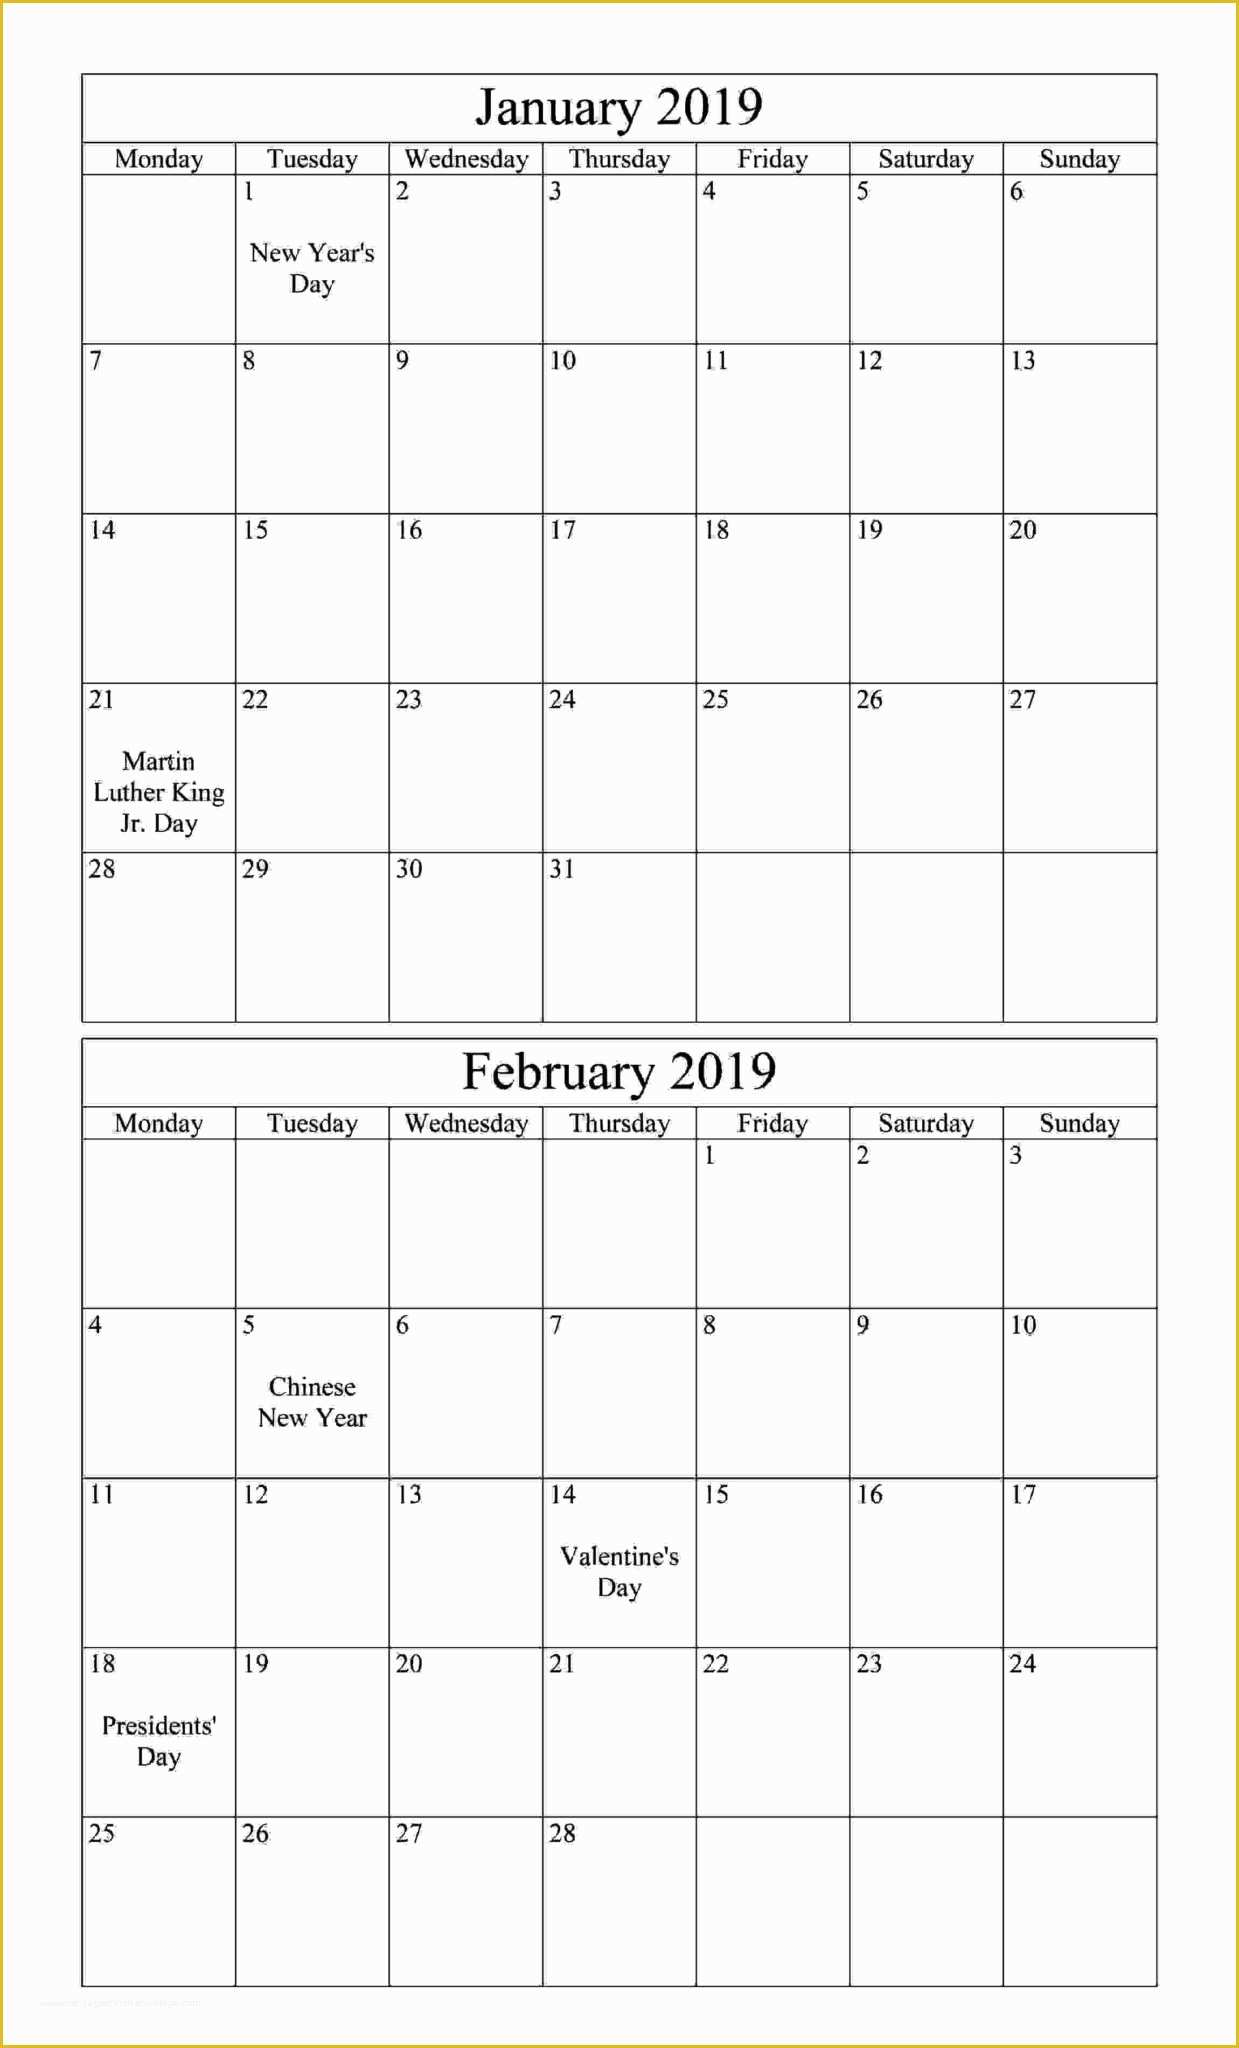 Holiday Schedule Template Free Of January February 2019 Calendar with Holiday